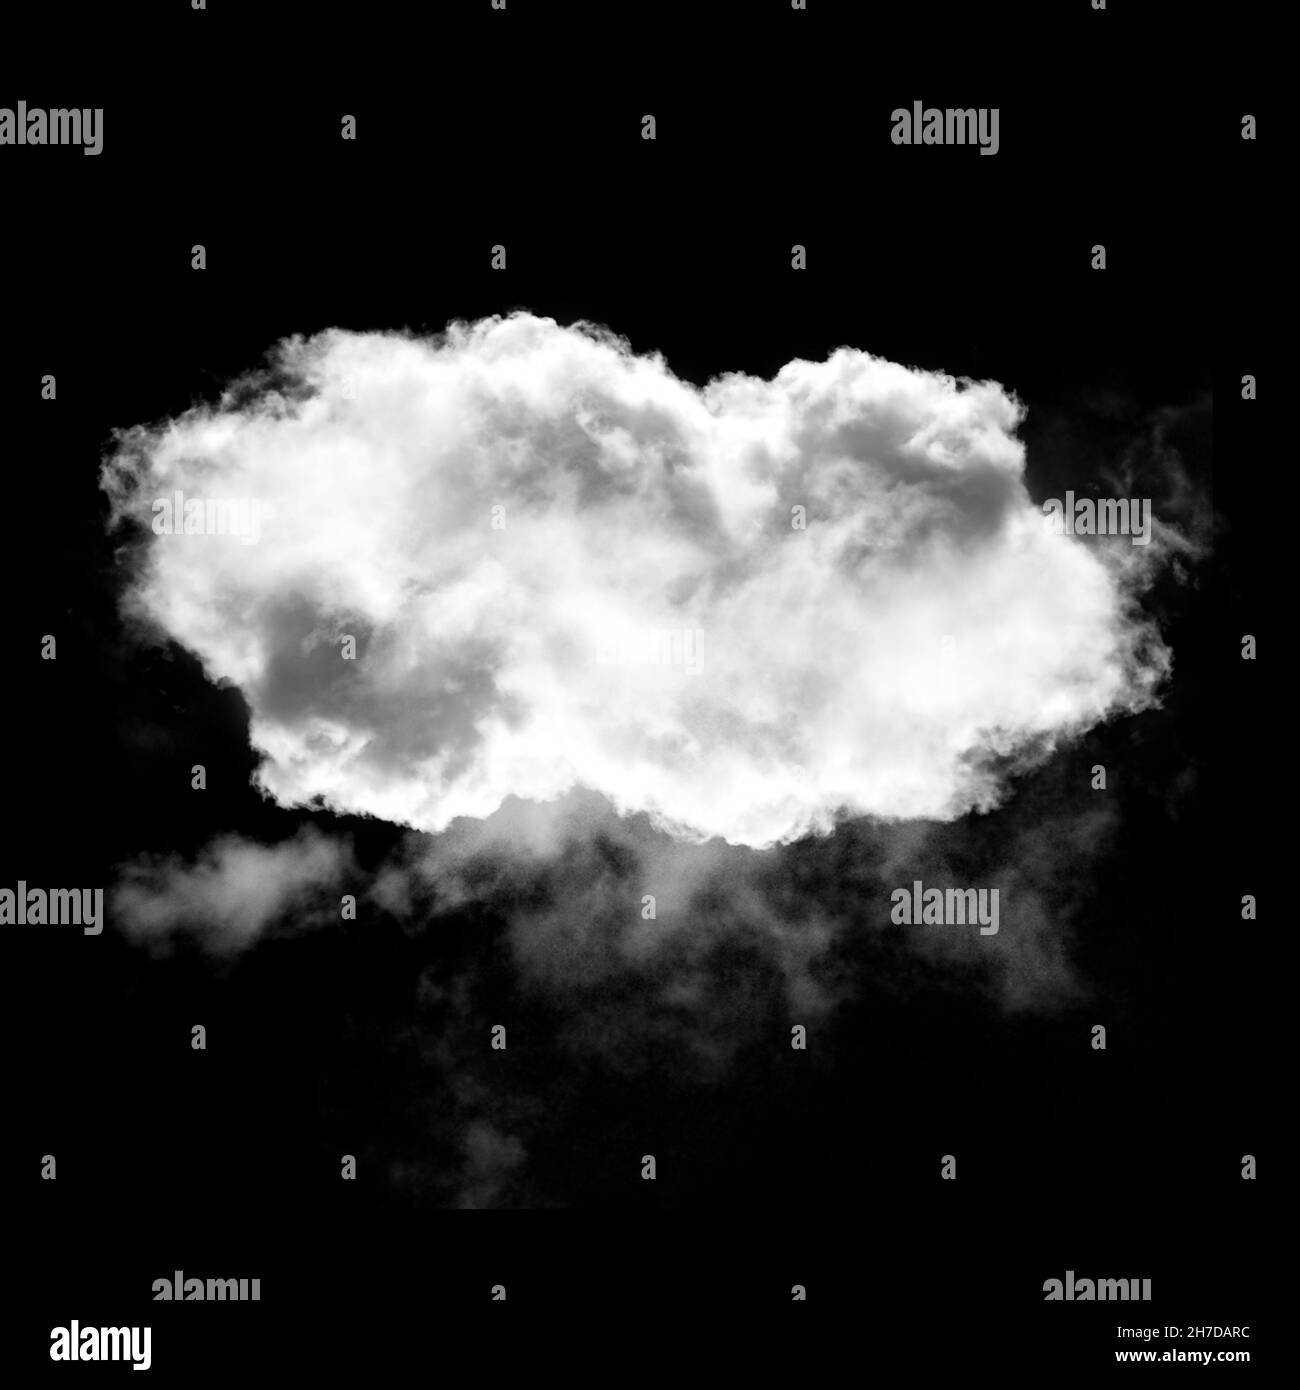 Clouds isolated over black background, illustration, drawing, 3D computer generated fluffy cloud shape Stock Photo